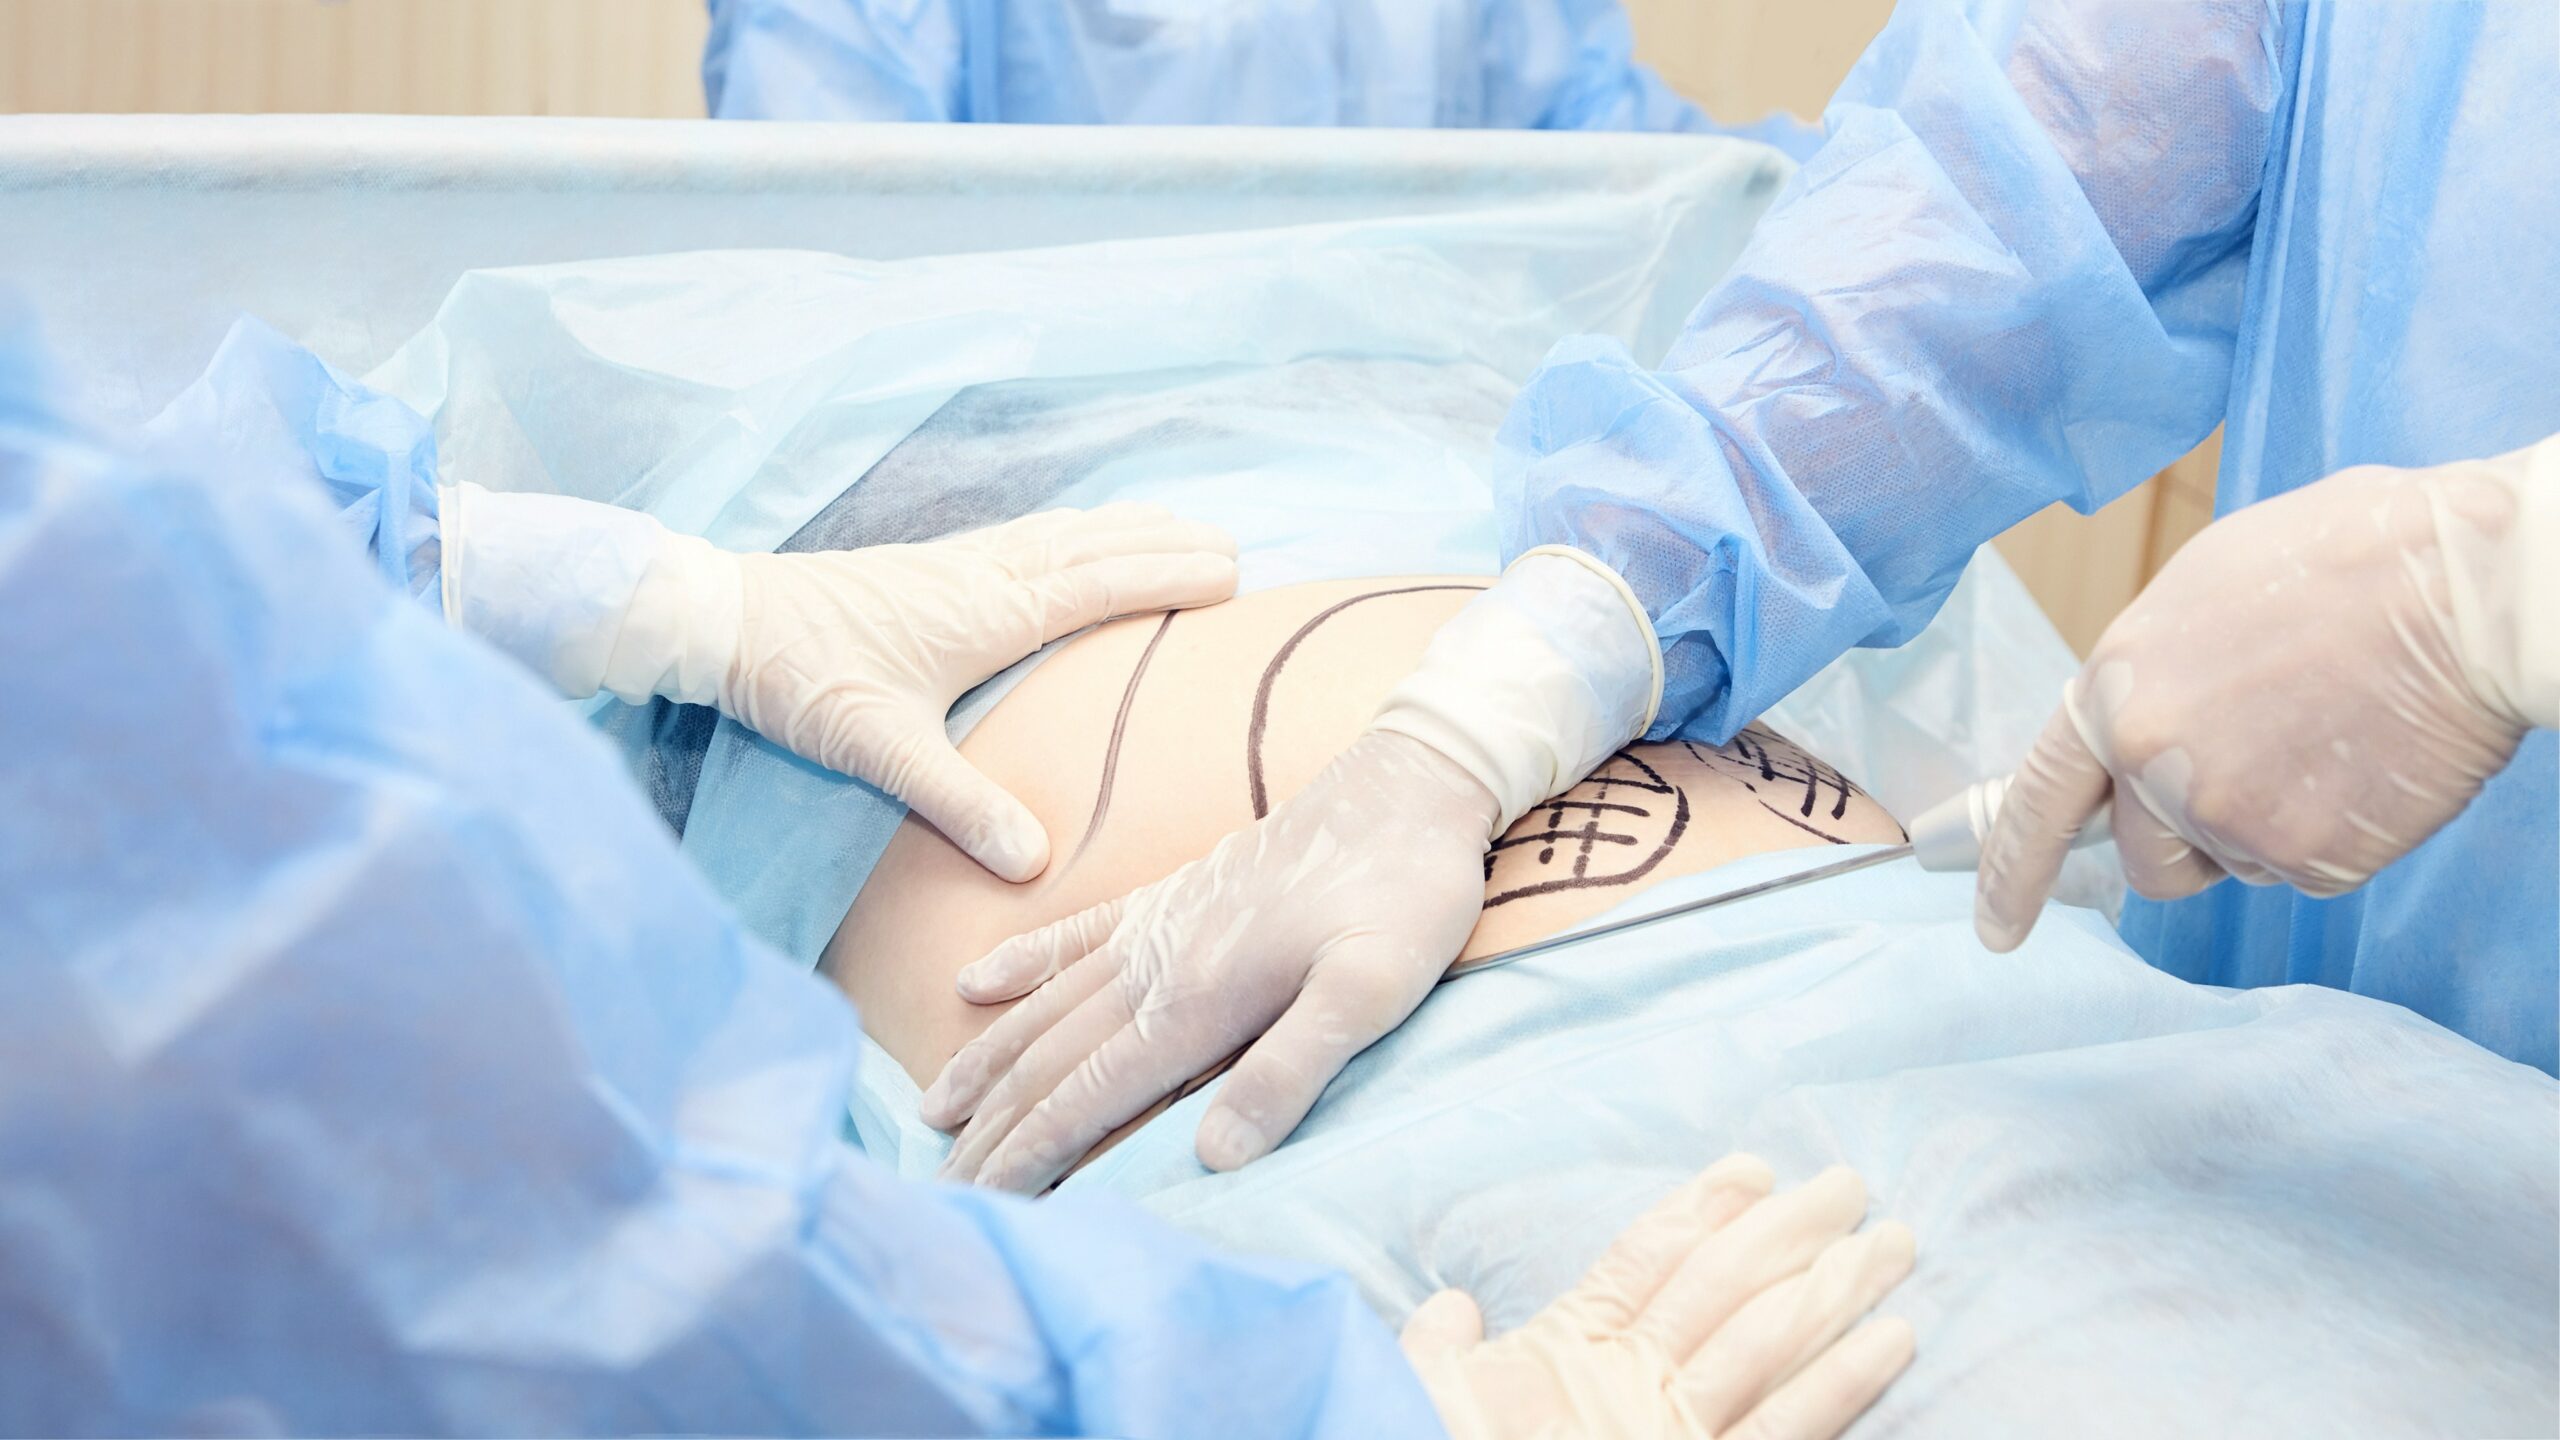 A patient covered up for operation with marking on the body with with 4 hands placing on the stomach